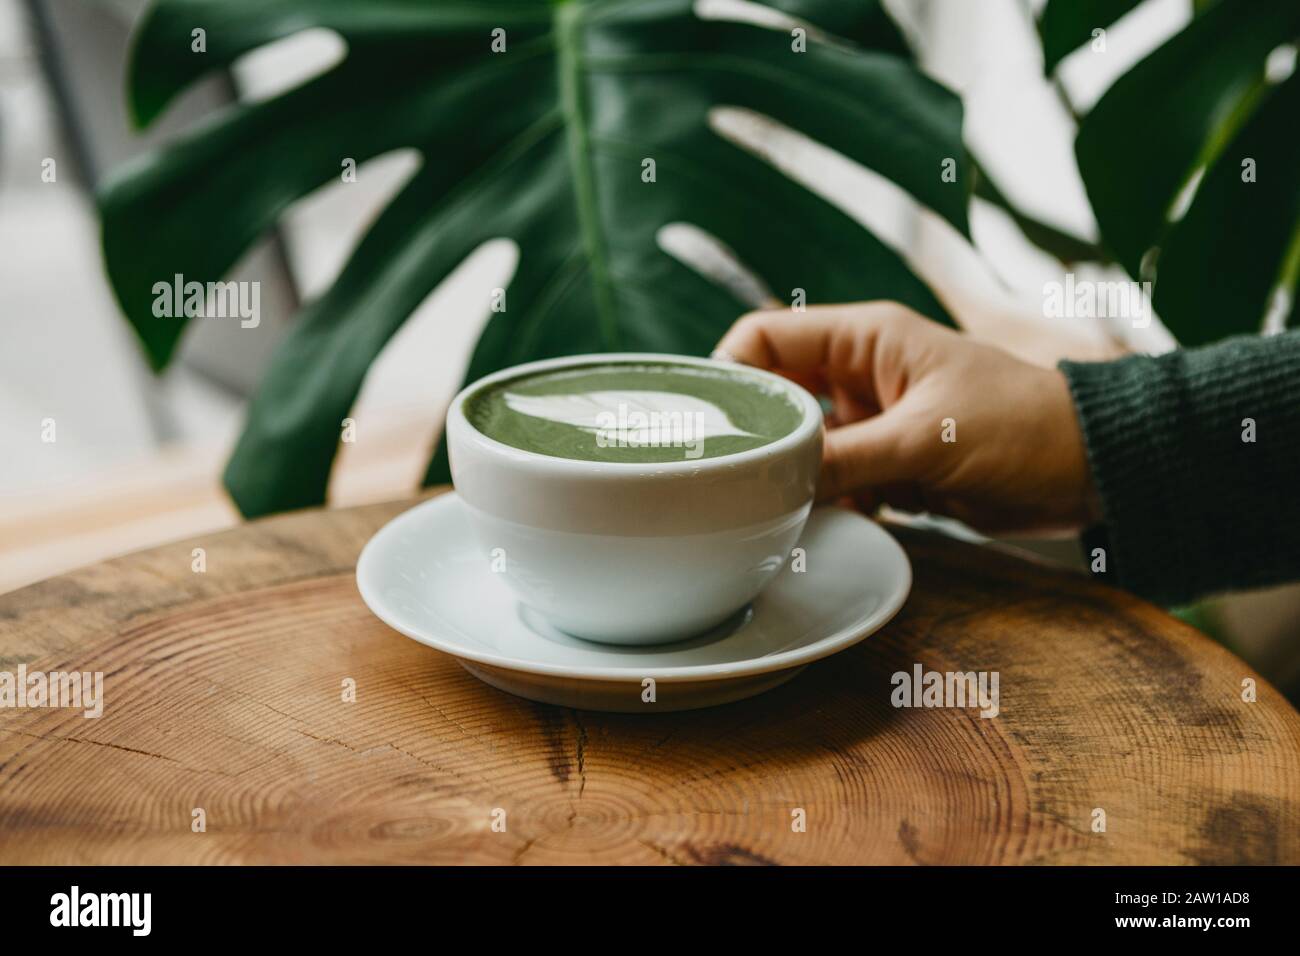 Girl drinks aromatic fresh and healthy green matcha latte tea in a cafe. Stock Photo